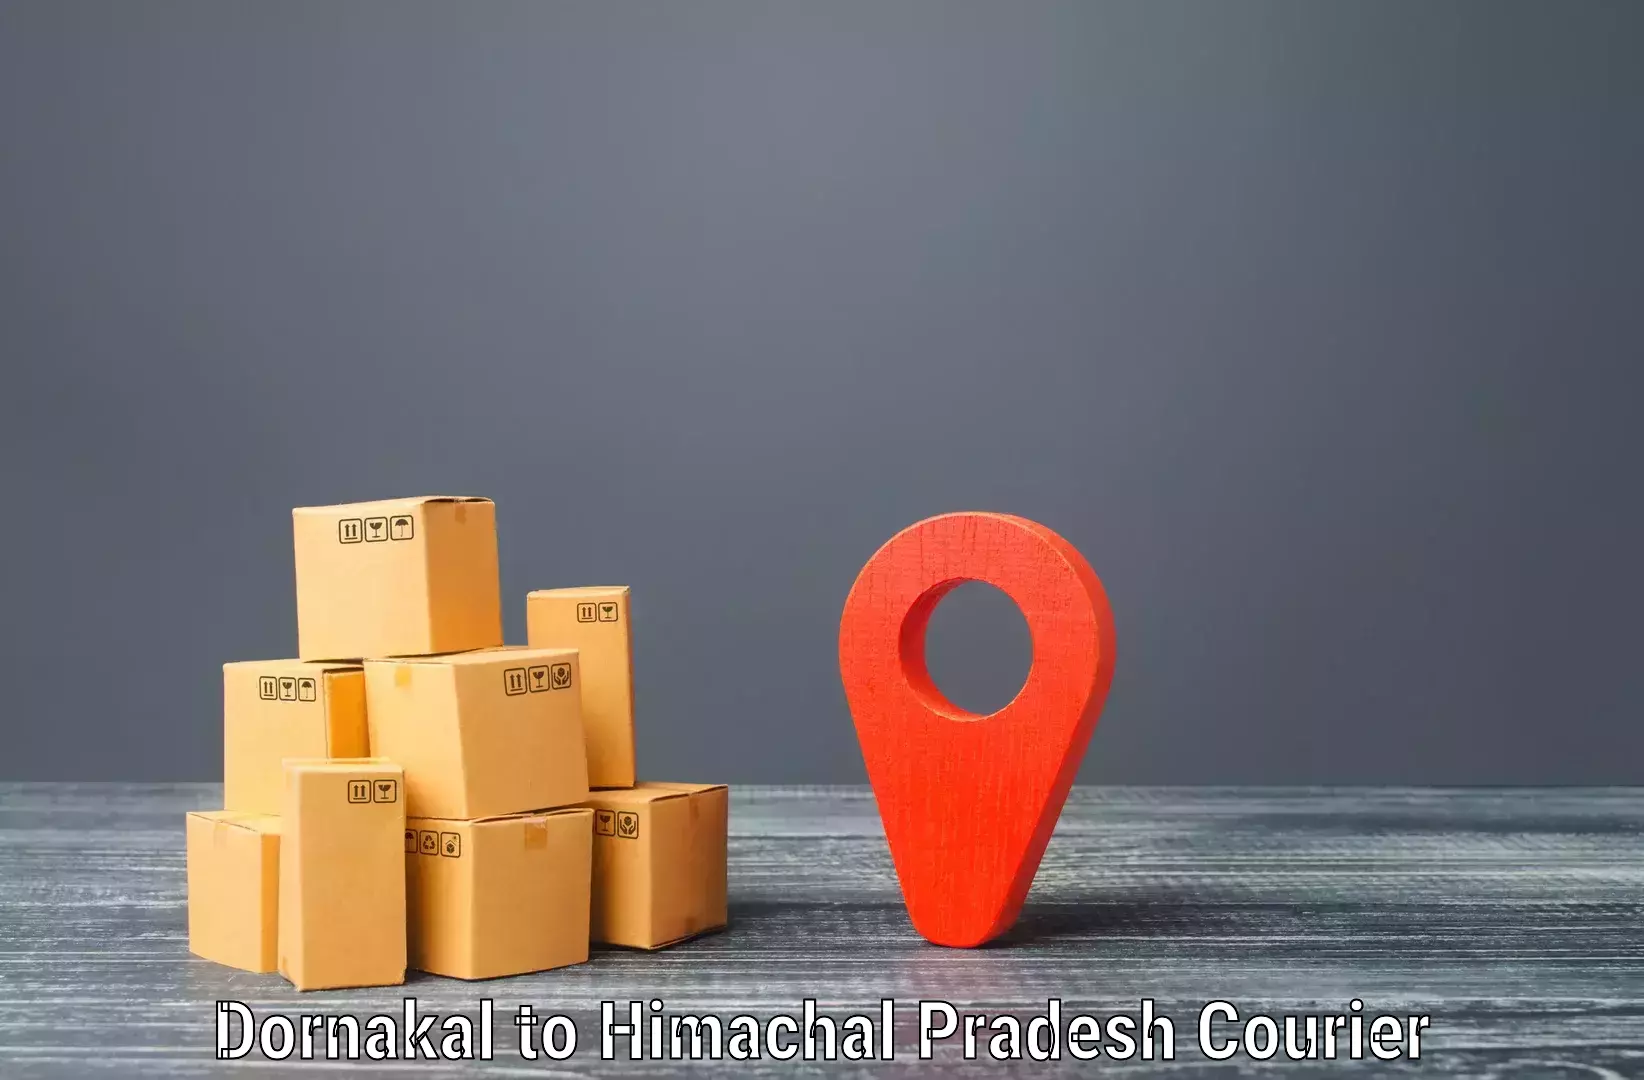 Flexible delivery scheduling Dornakal to Baddi